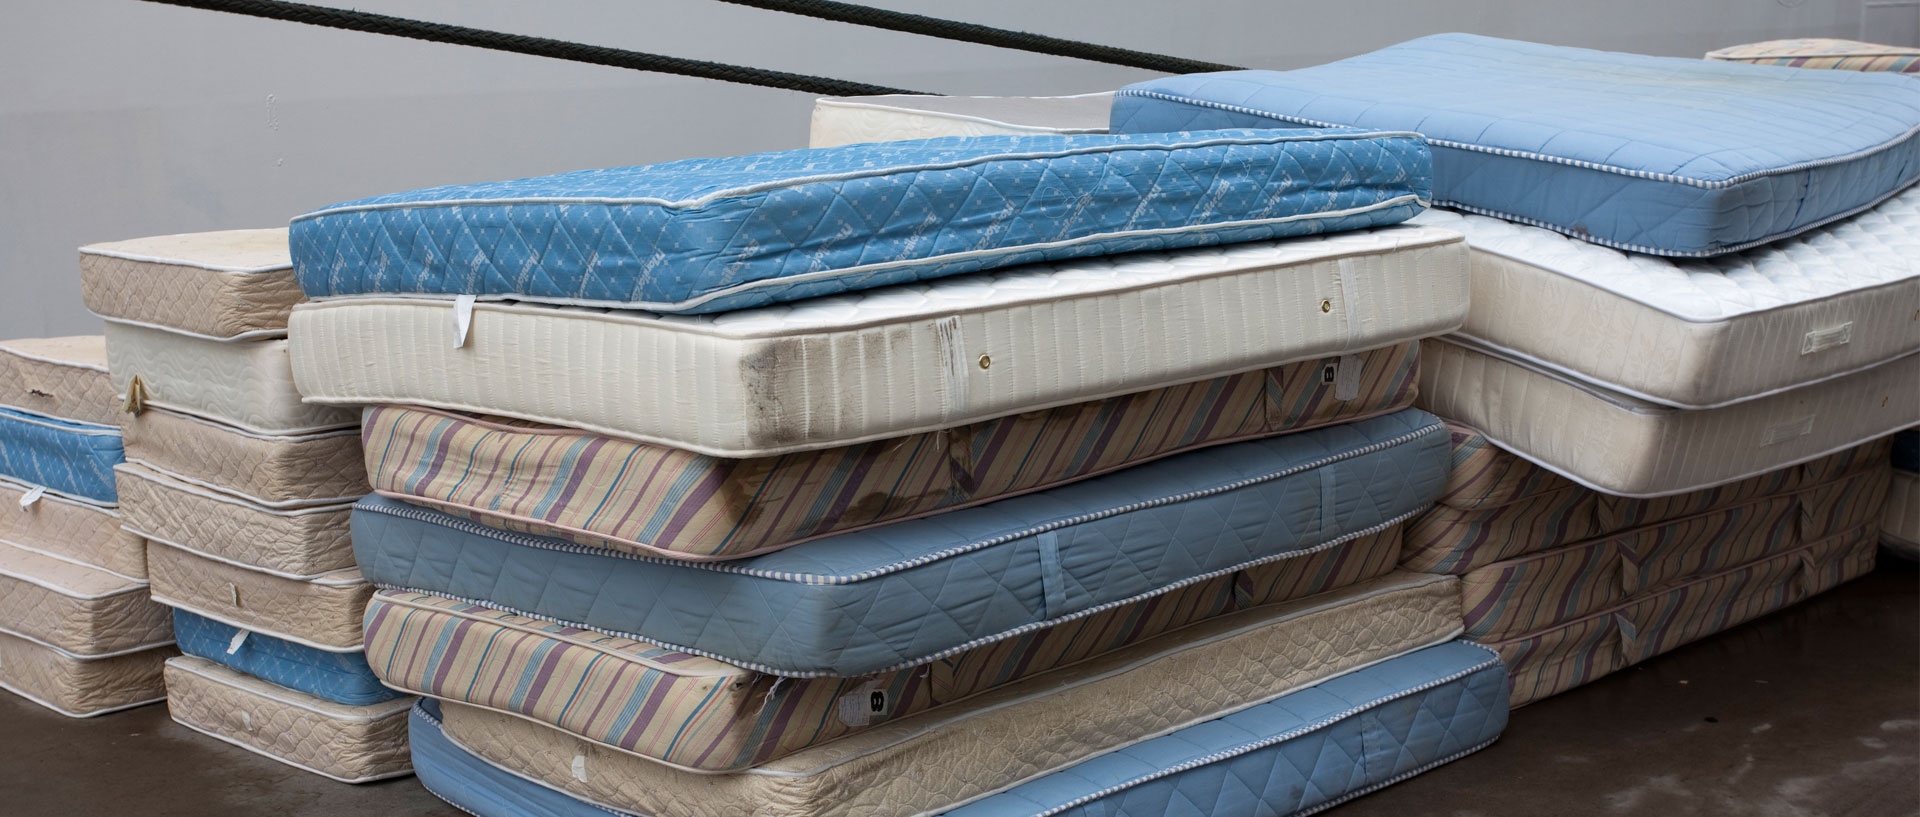 can i sell a used mattress in mn